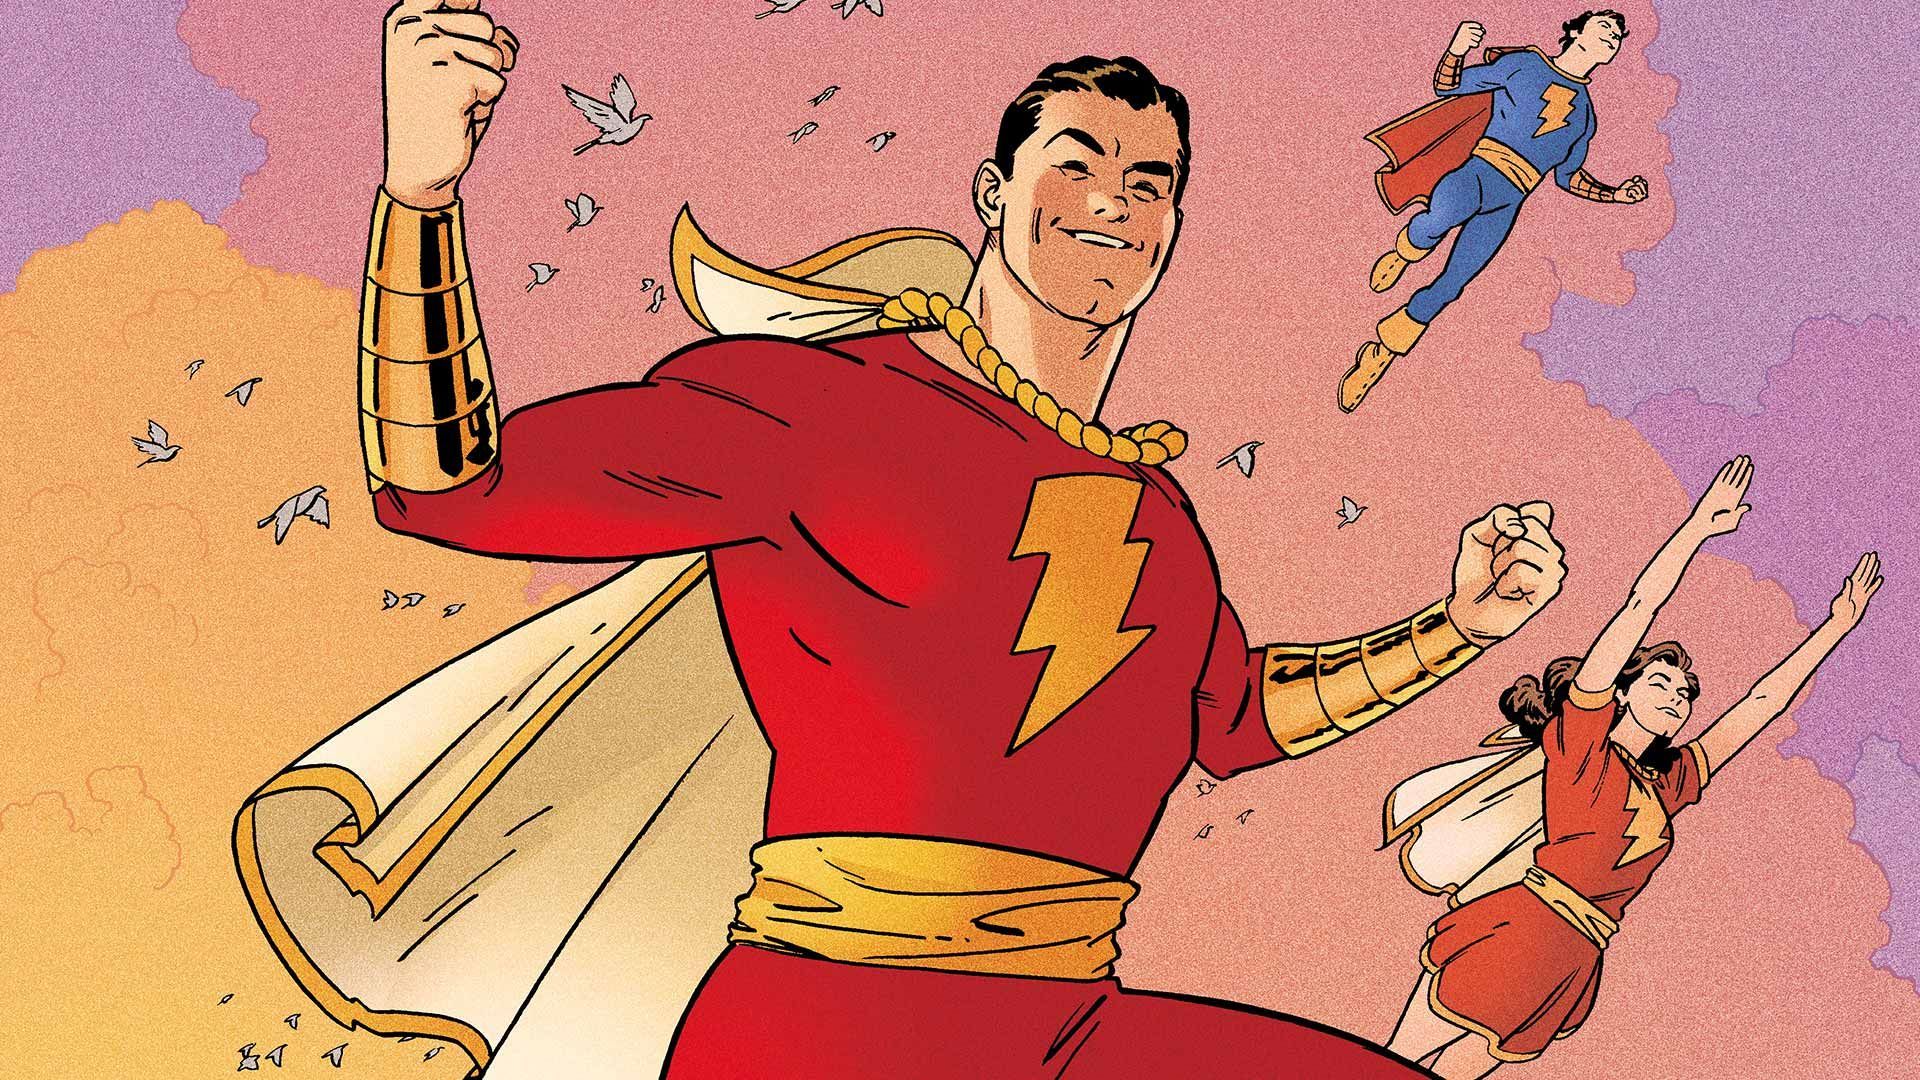 This hilarious 'first look' at DC's Shazam! movie sounds like bad news for Superman